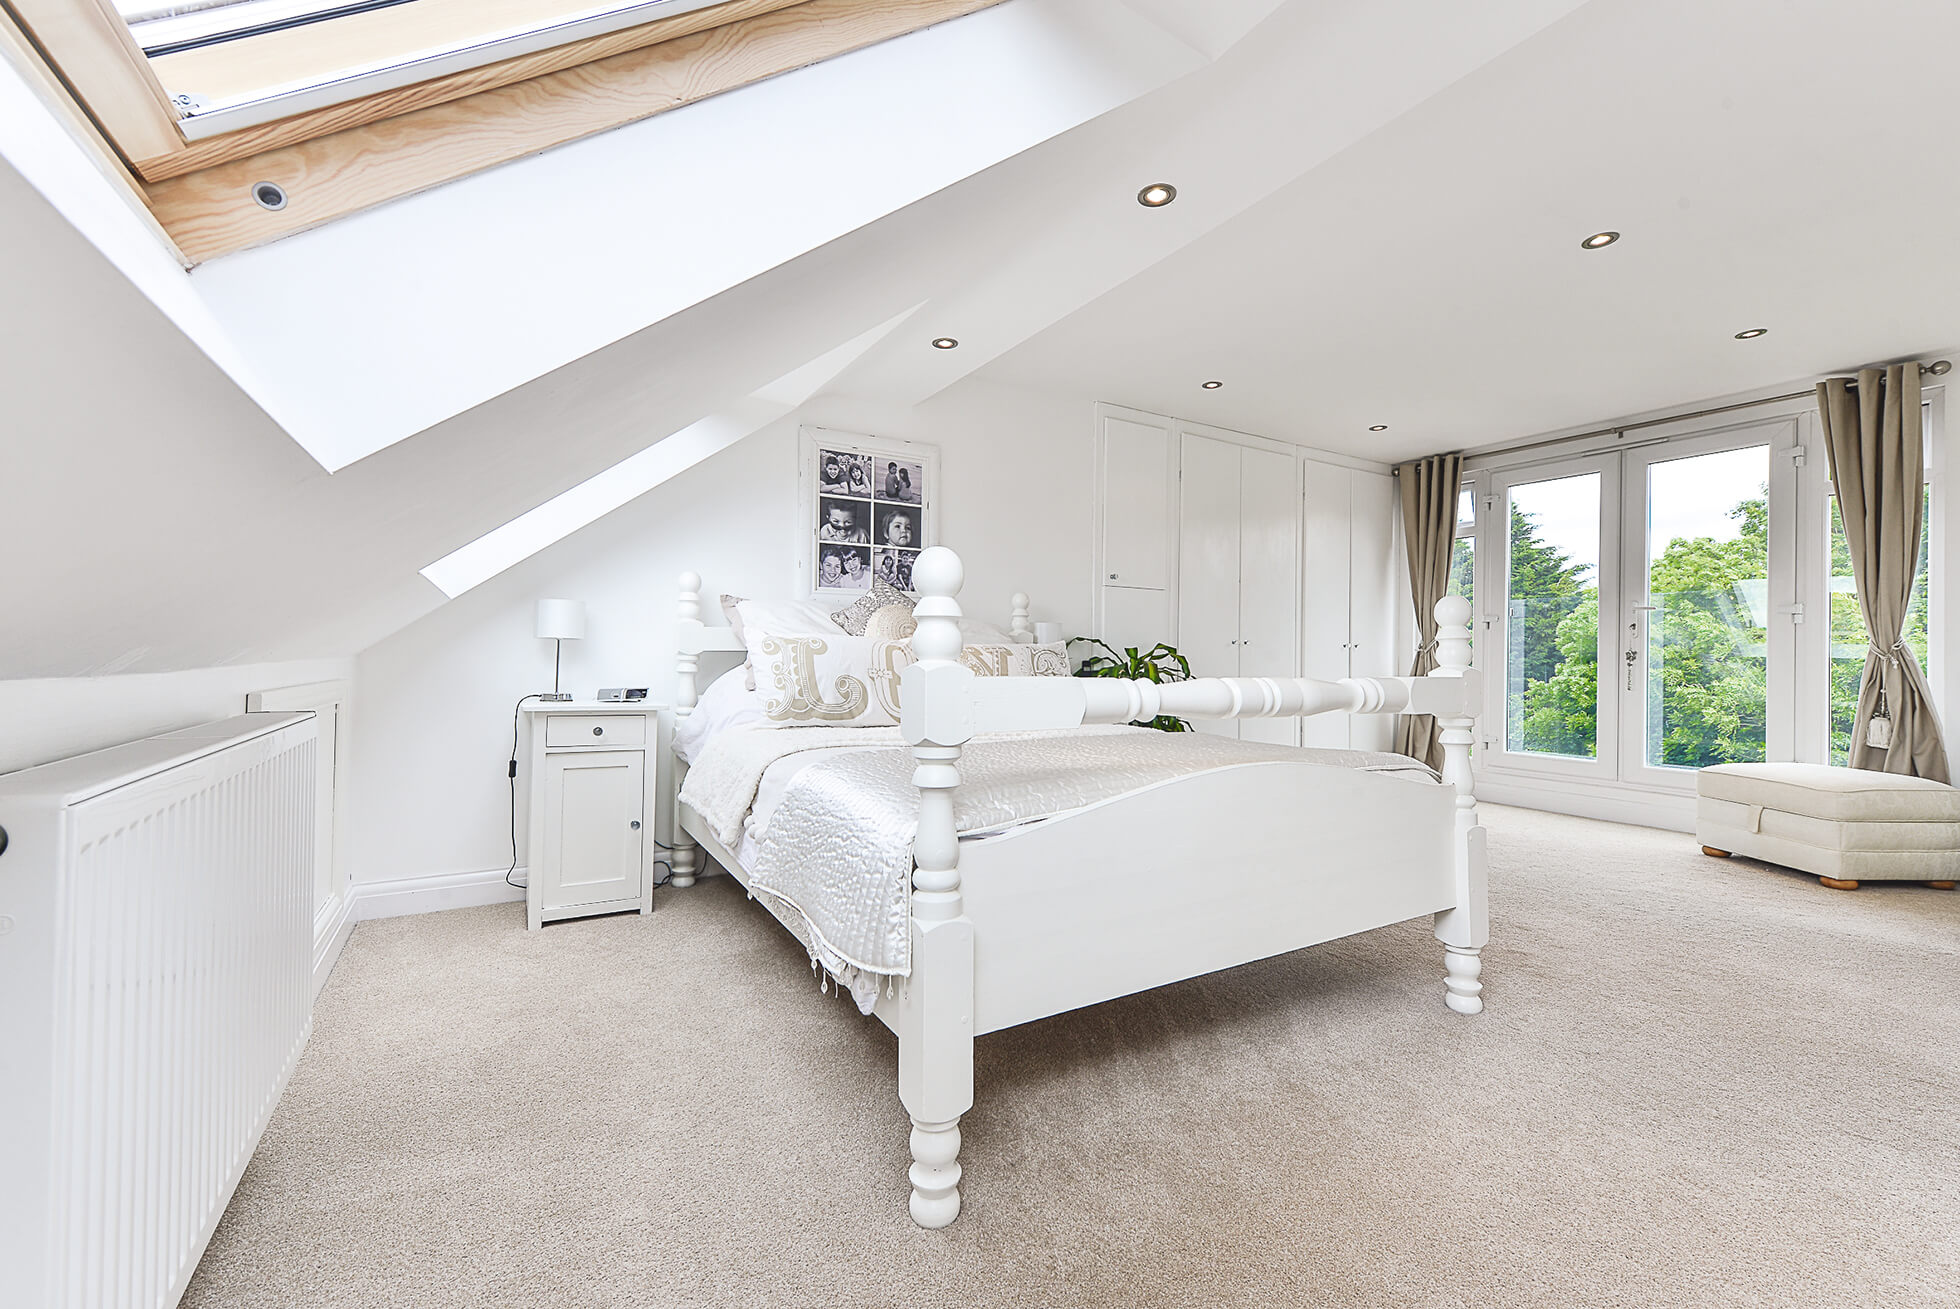 Do you have a question about converting your Loft in Roe Green? Here are the most popular questions asked by our clients.